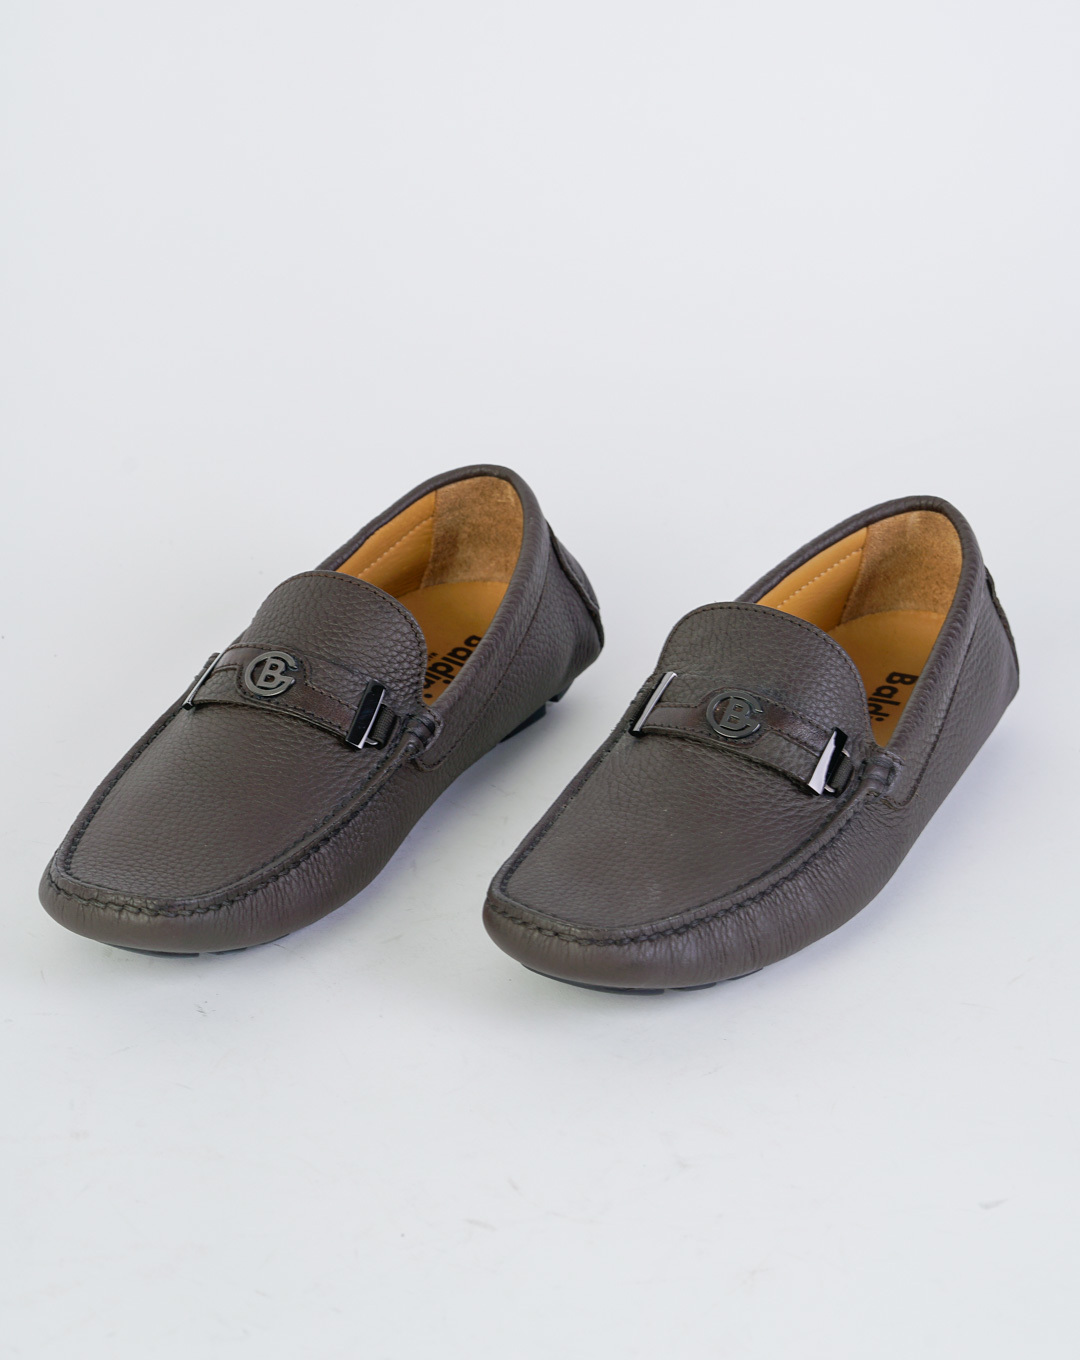 nappa leather loafers